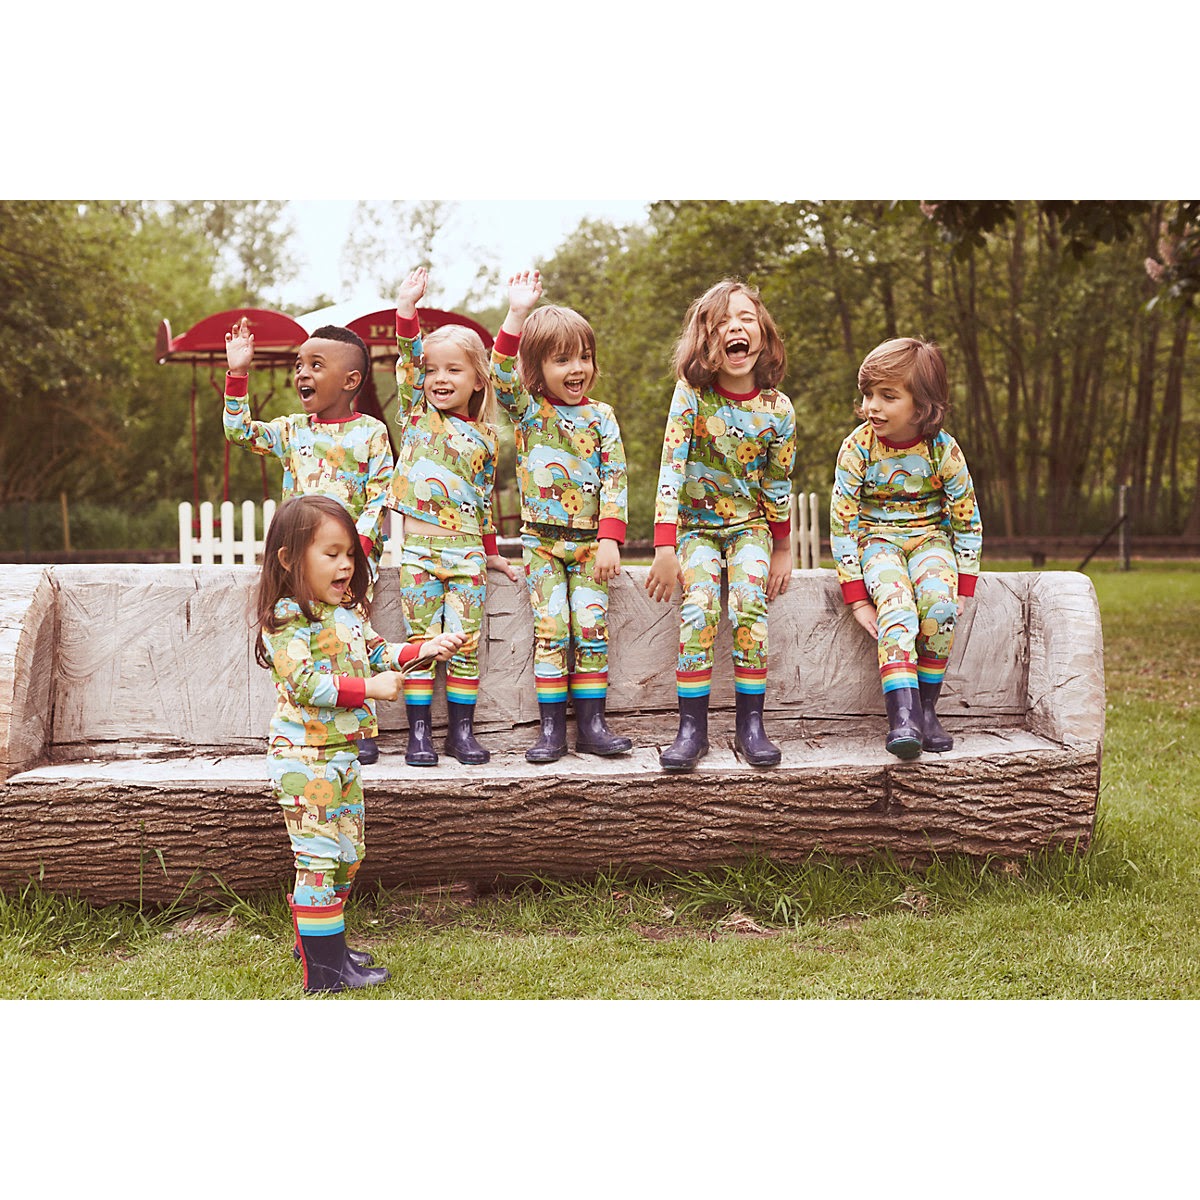 Why I Love the Little Bird by Jools Oliver at Mothercare collection - and what I want to see next! | mothercare | little bird | kooks Oliver |jamie oliver | kids fashion | collection } new collection | retro clothing for kids | little bird by jools | little bird | mamasvib | rainbow | birthday pyjamas | printed clothes for kids | vintage style | mothercare | instagram jamie oliver | mamas very important baby